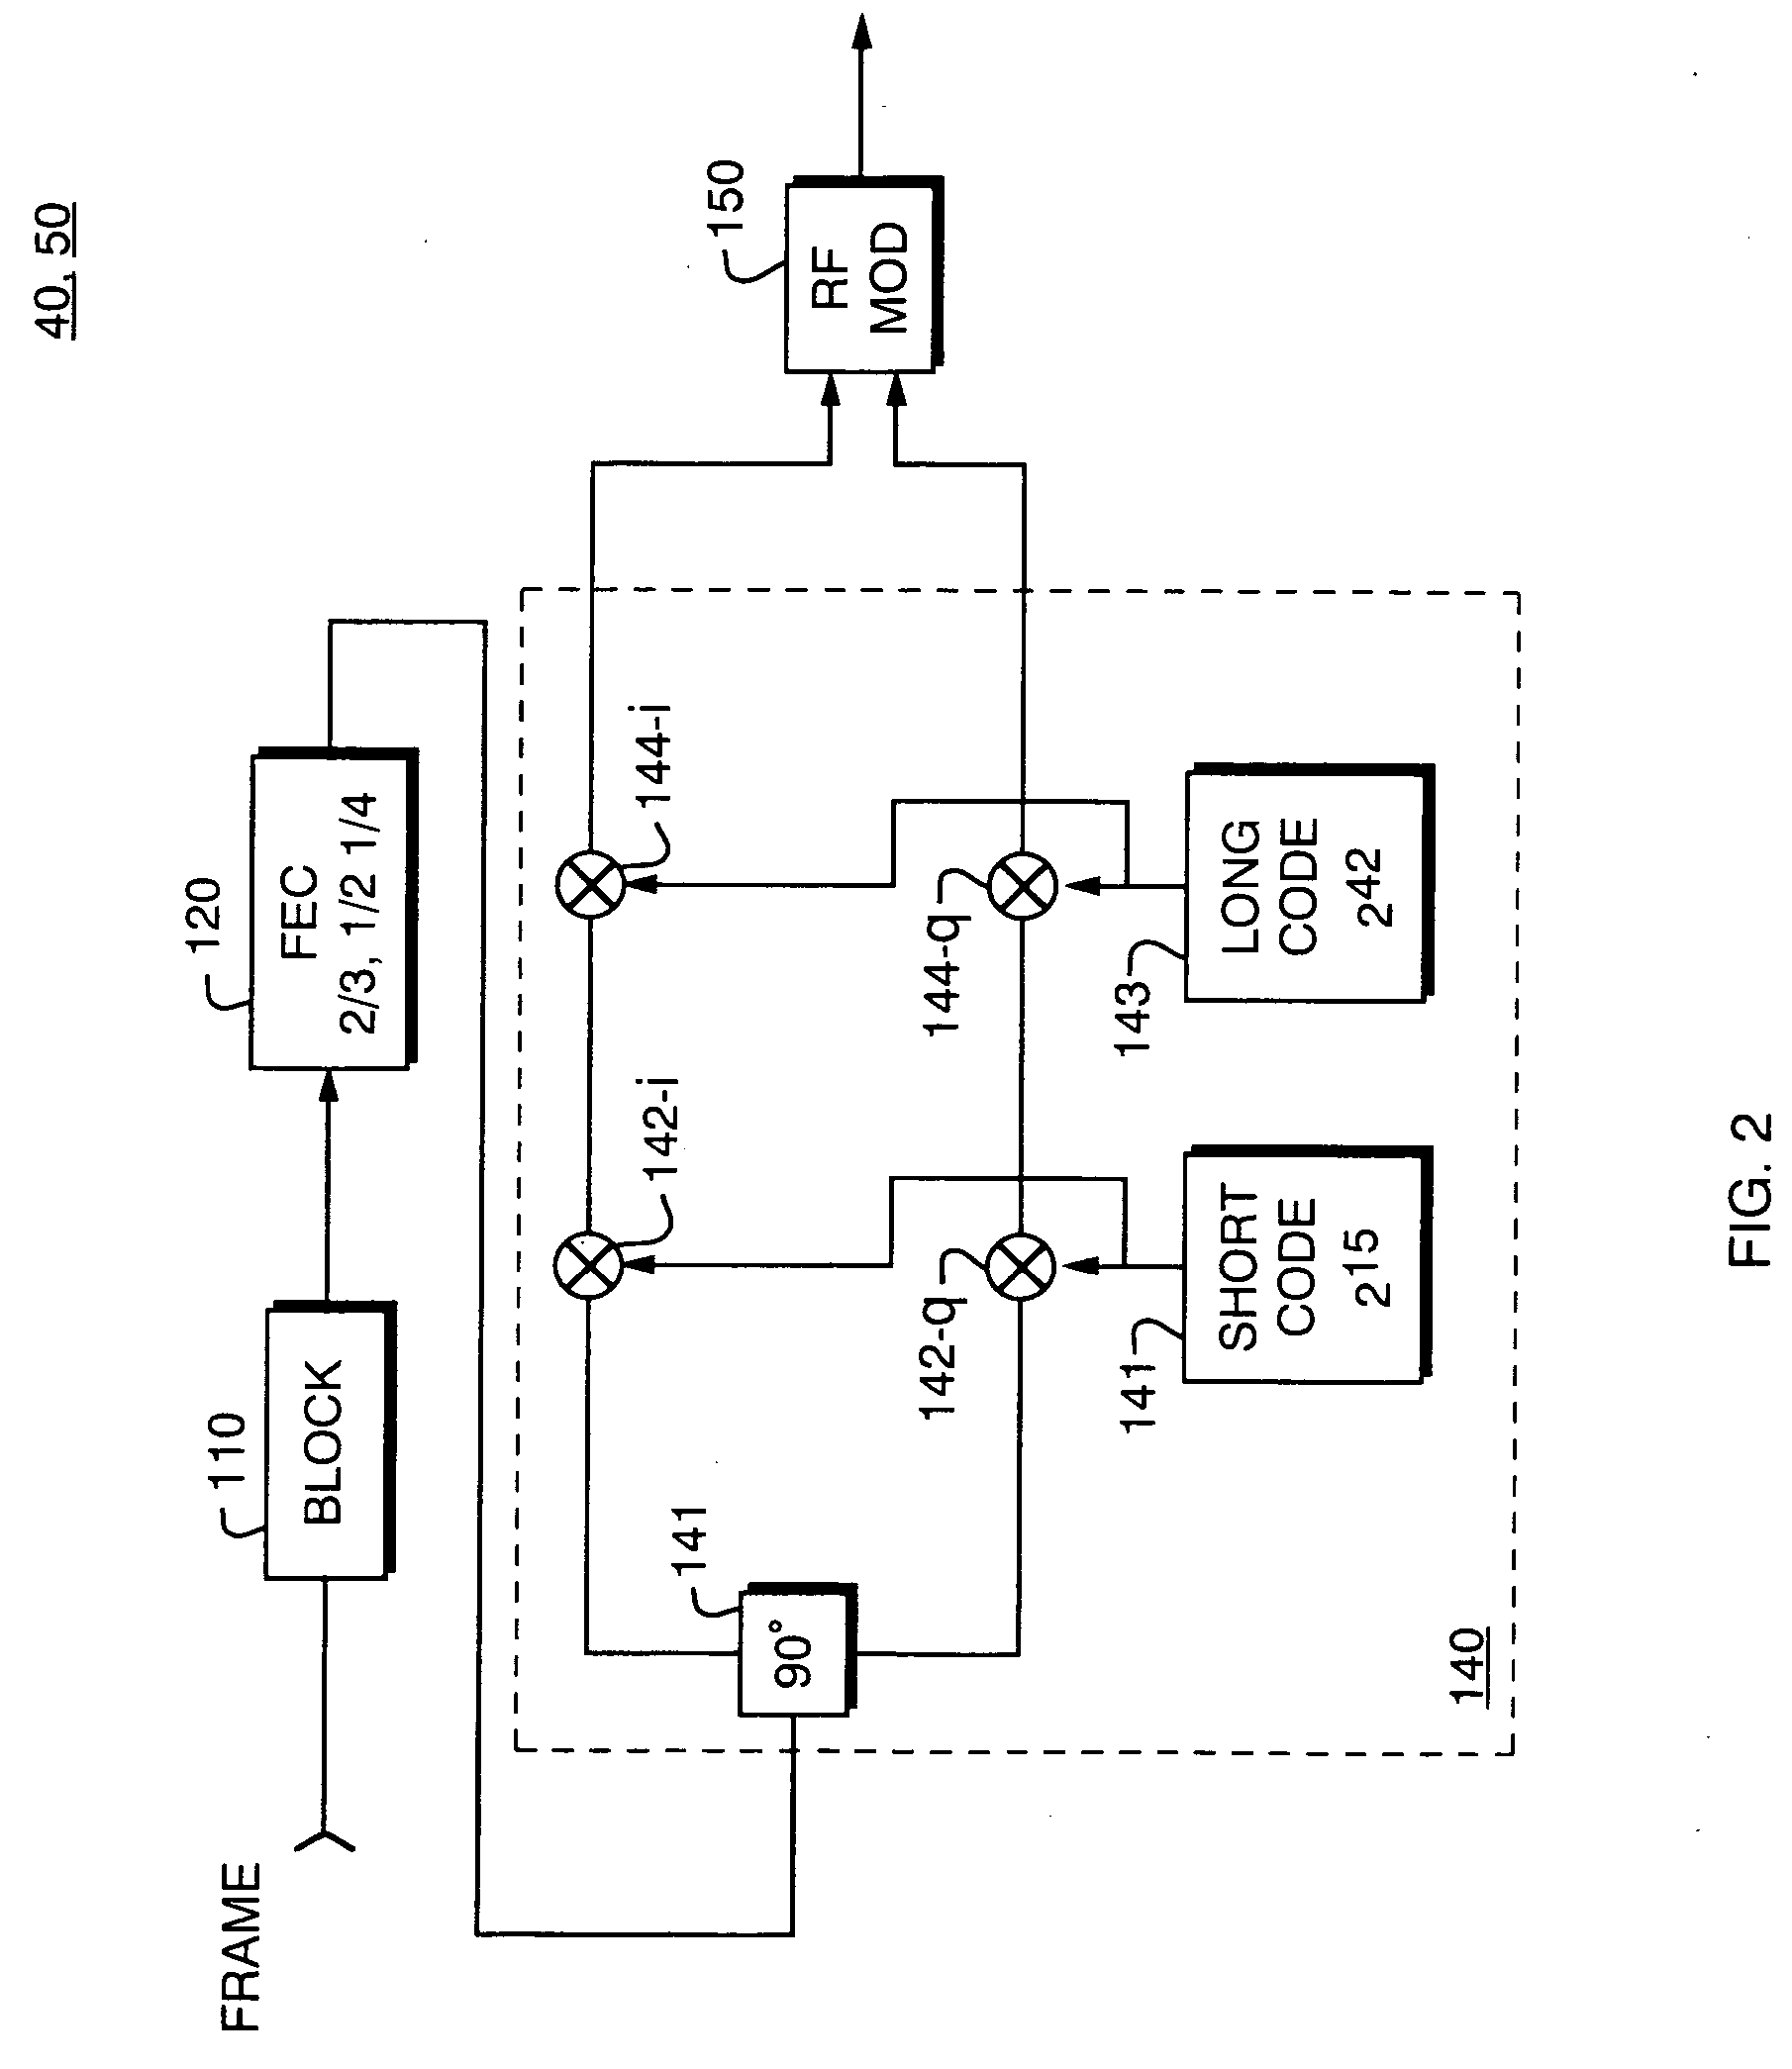 Fast switching of forward link in wireless system